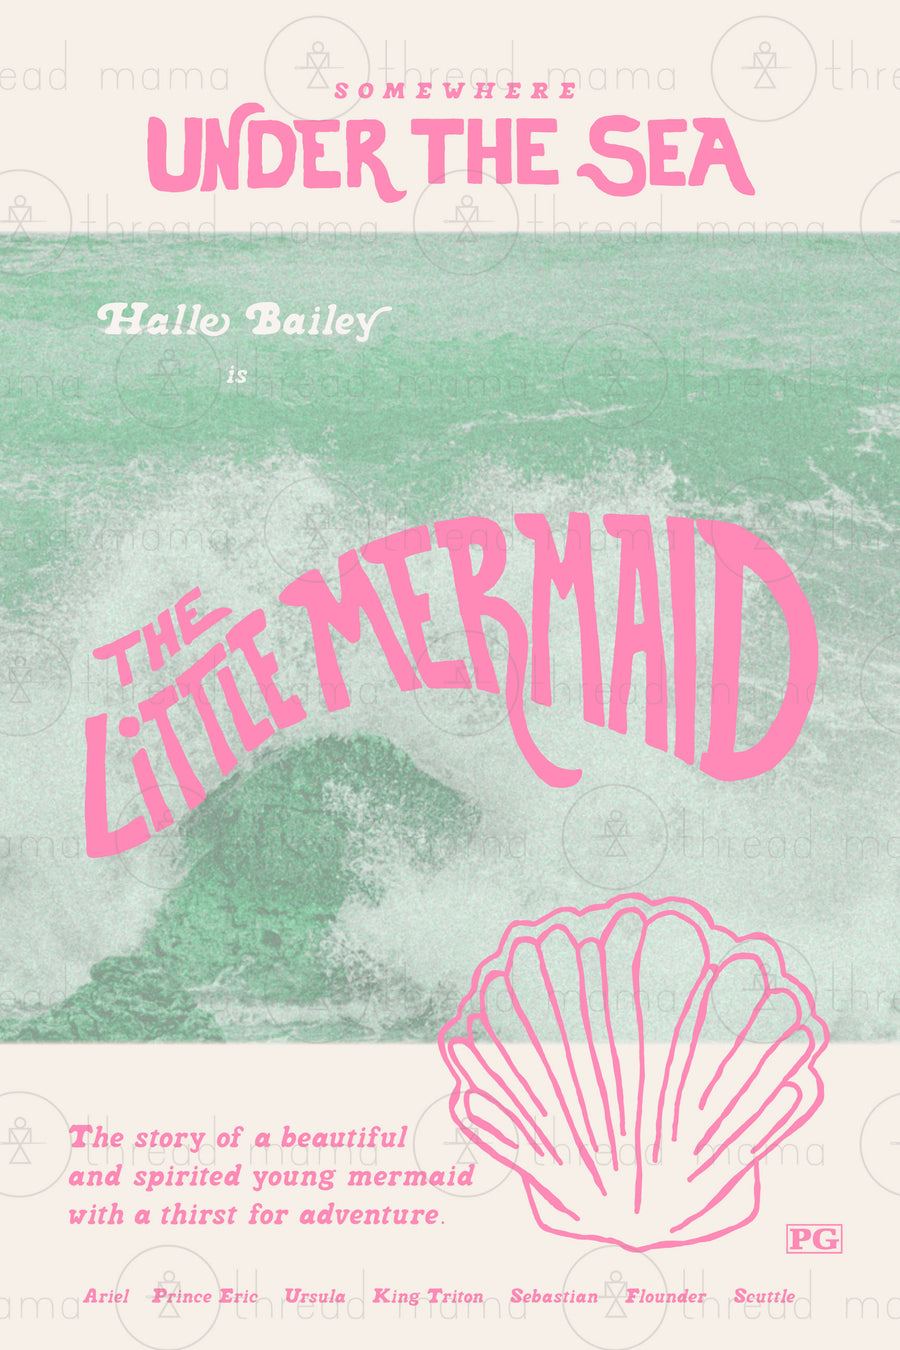 The Little Mermaid Movie Poster